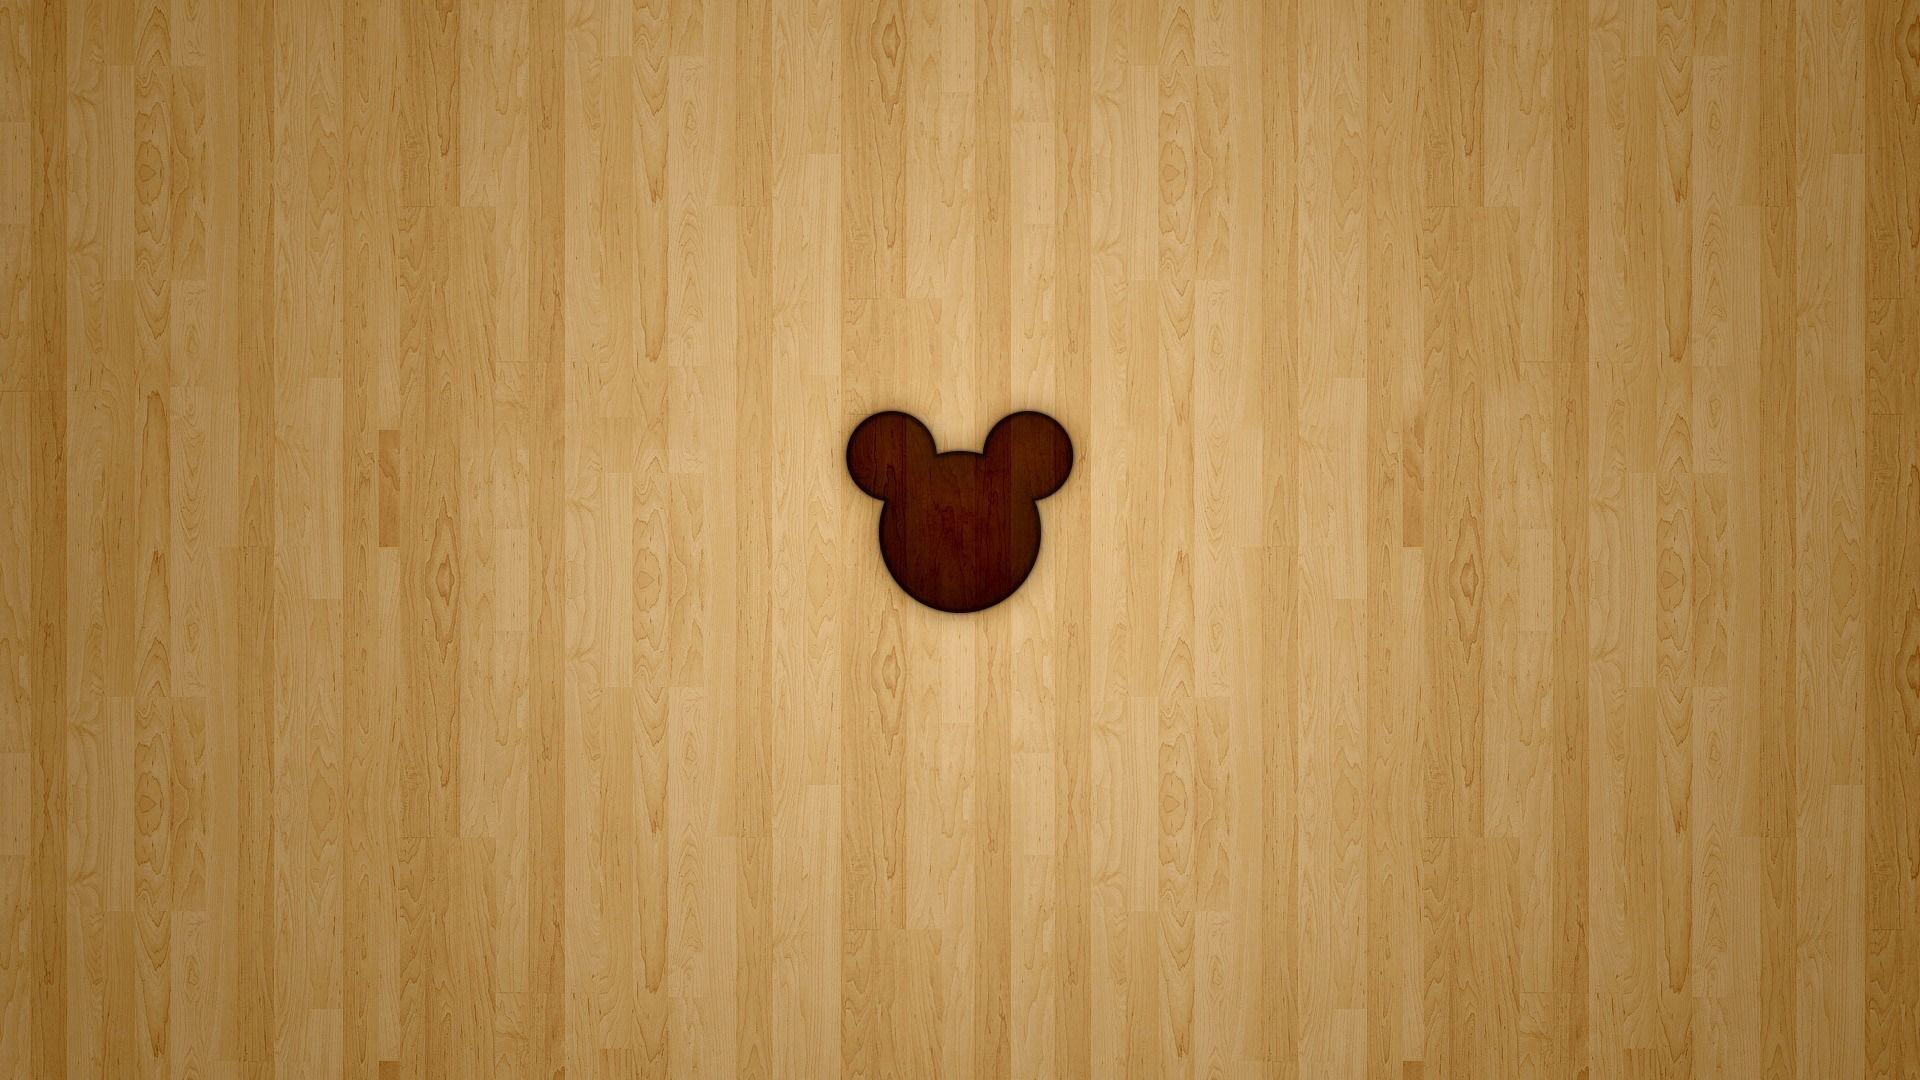 Mickey Mouse Logo wallpaper and image, picture, photo